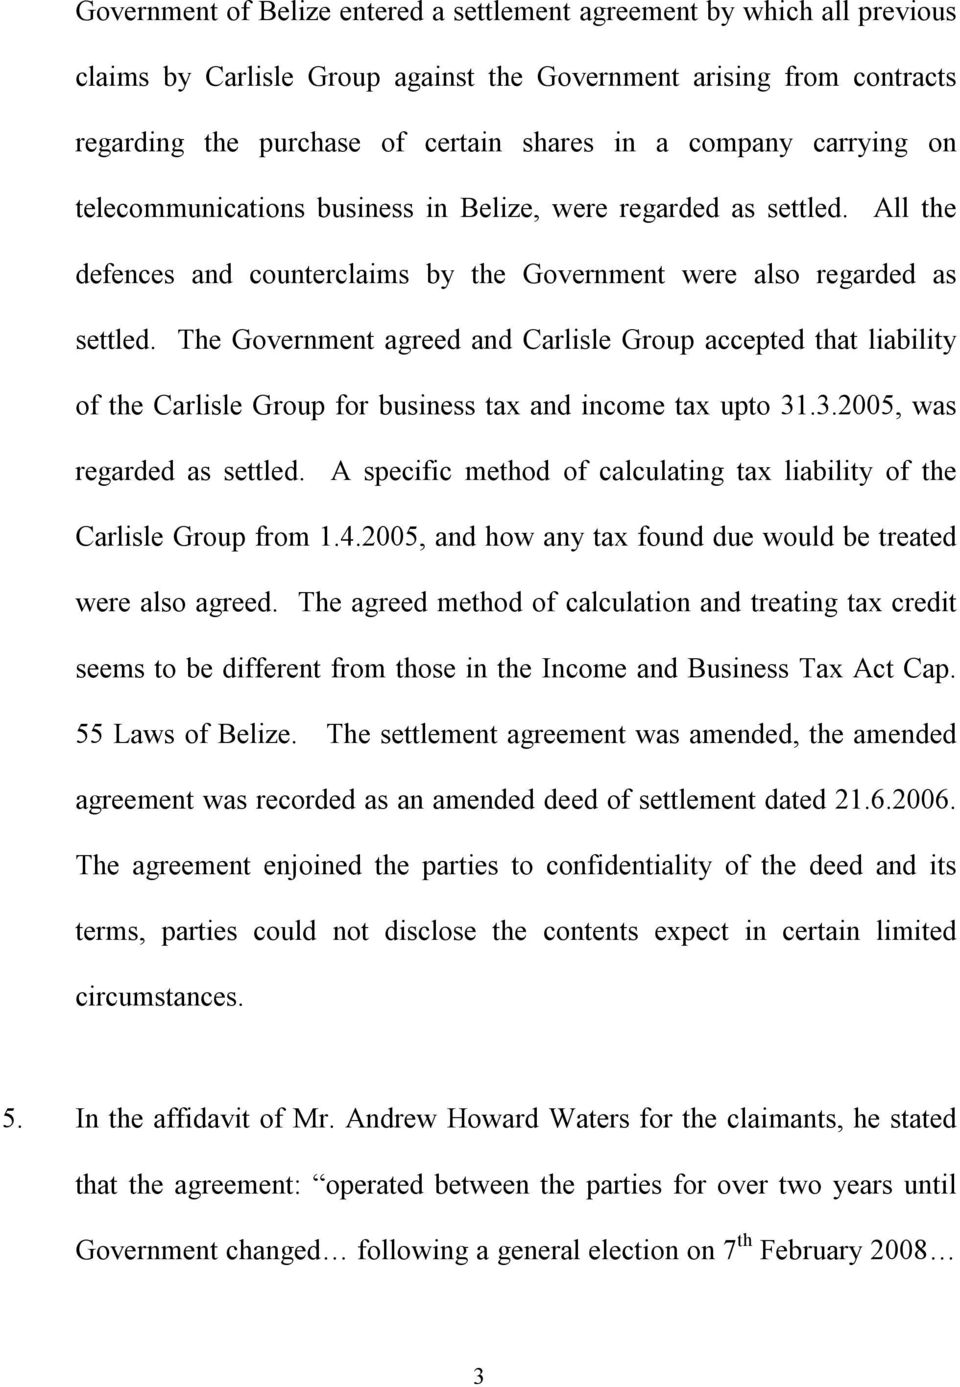 The Government agreed and Carlisle Group accepted that liability of the Carlisle Group for business tax and income tax upto 31.3.2005, was regarded as settled.